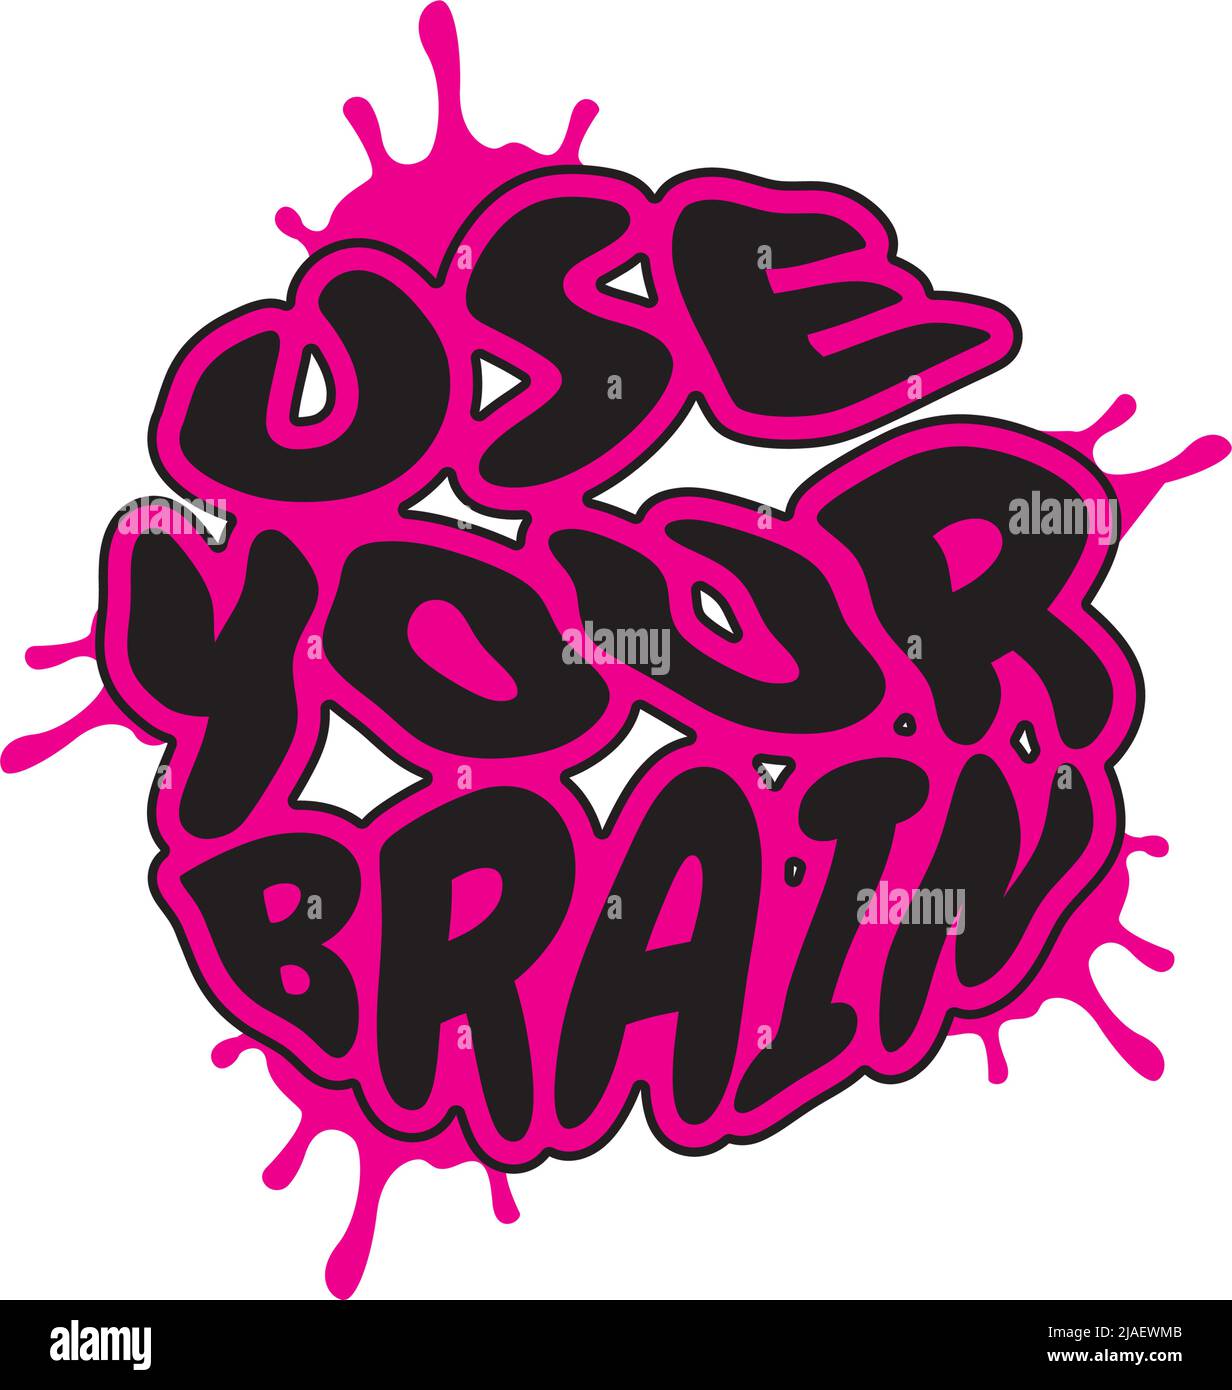 Use your brain, vector. Motivational inspirational positive quotes. Wording design isolated on white background. T shirt design Stock Vector